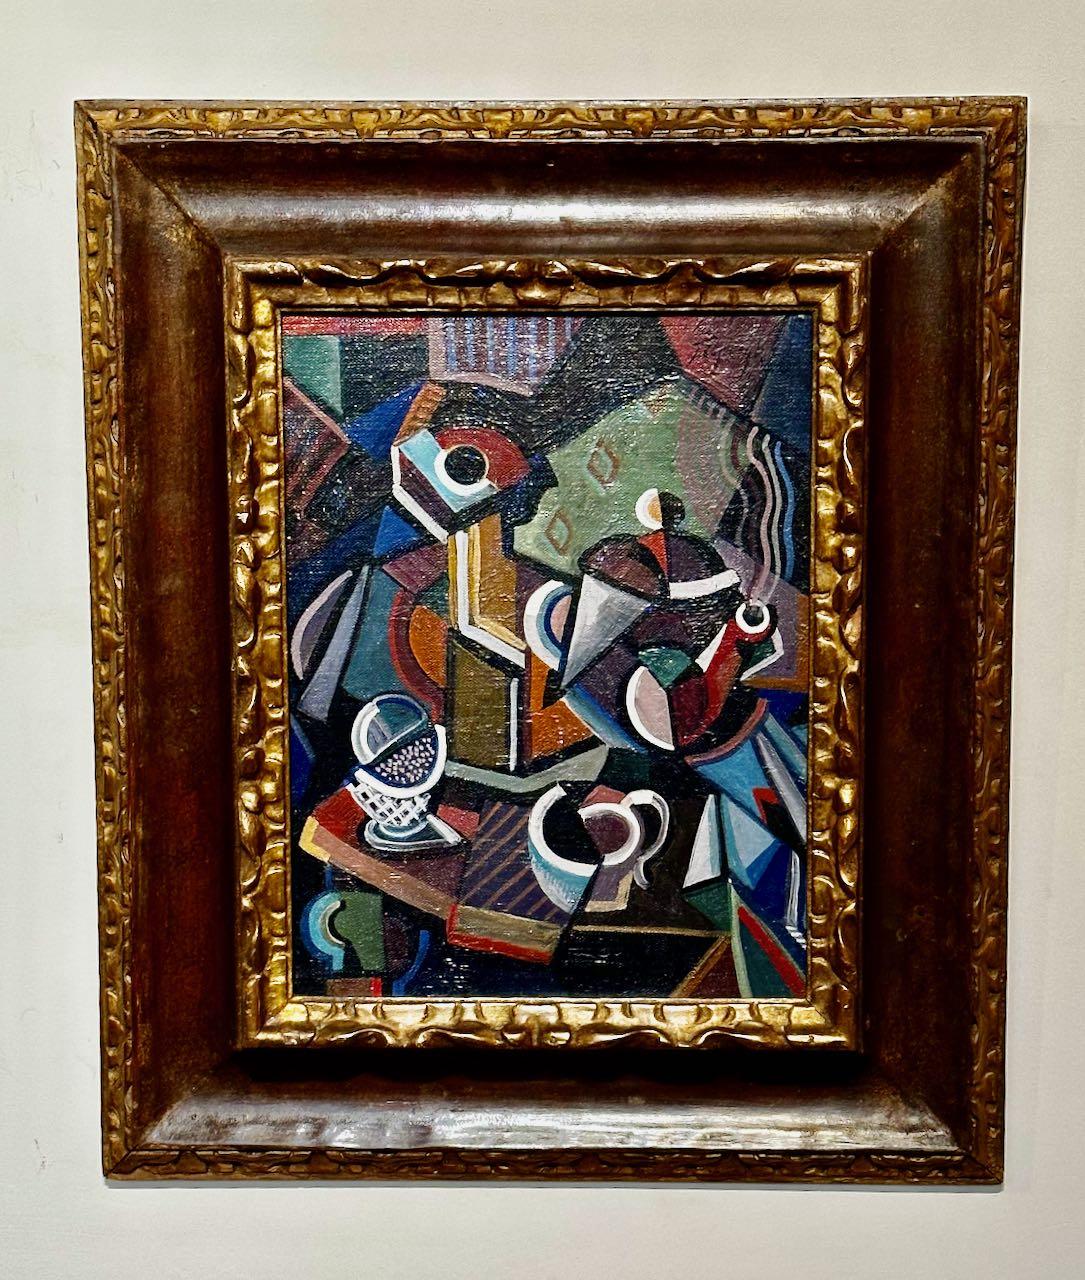 Joseph Popczyk Polish artist known for his vivid palette and love of Cubism, and in this case, the chevrons and wavy patterns of Art Deco can be detected also. The artist was born in Poland and — like many of his contemporaries in Eastern Europe —